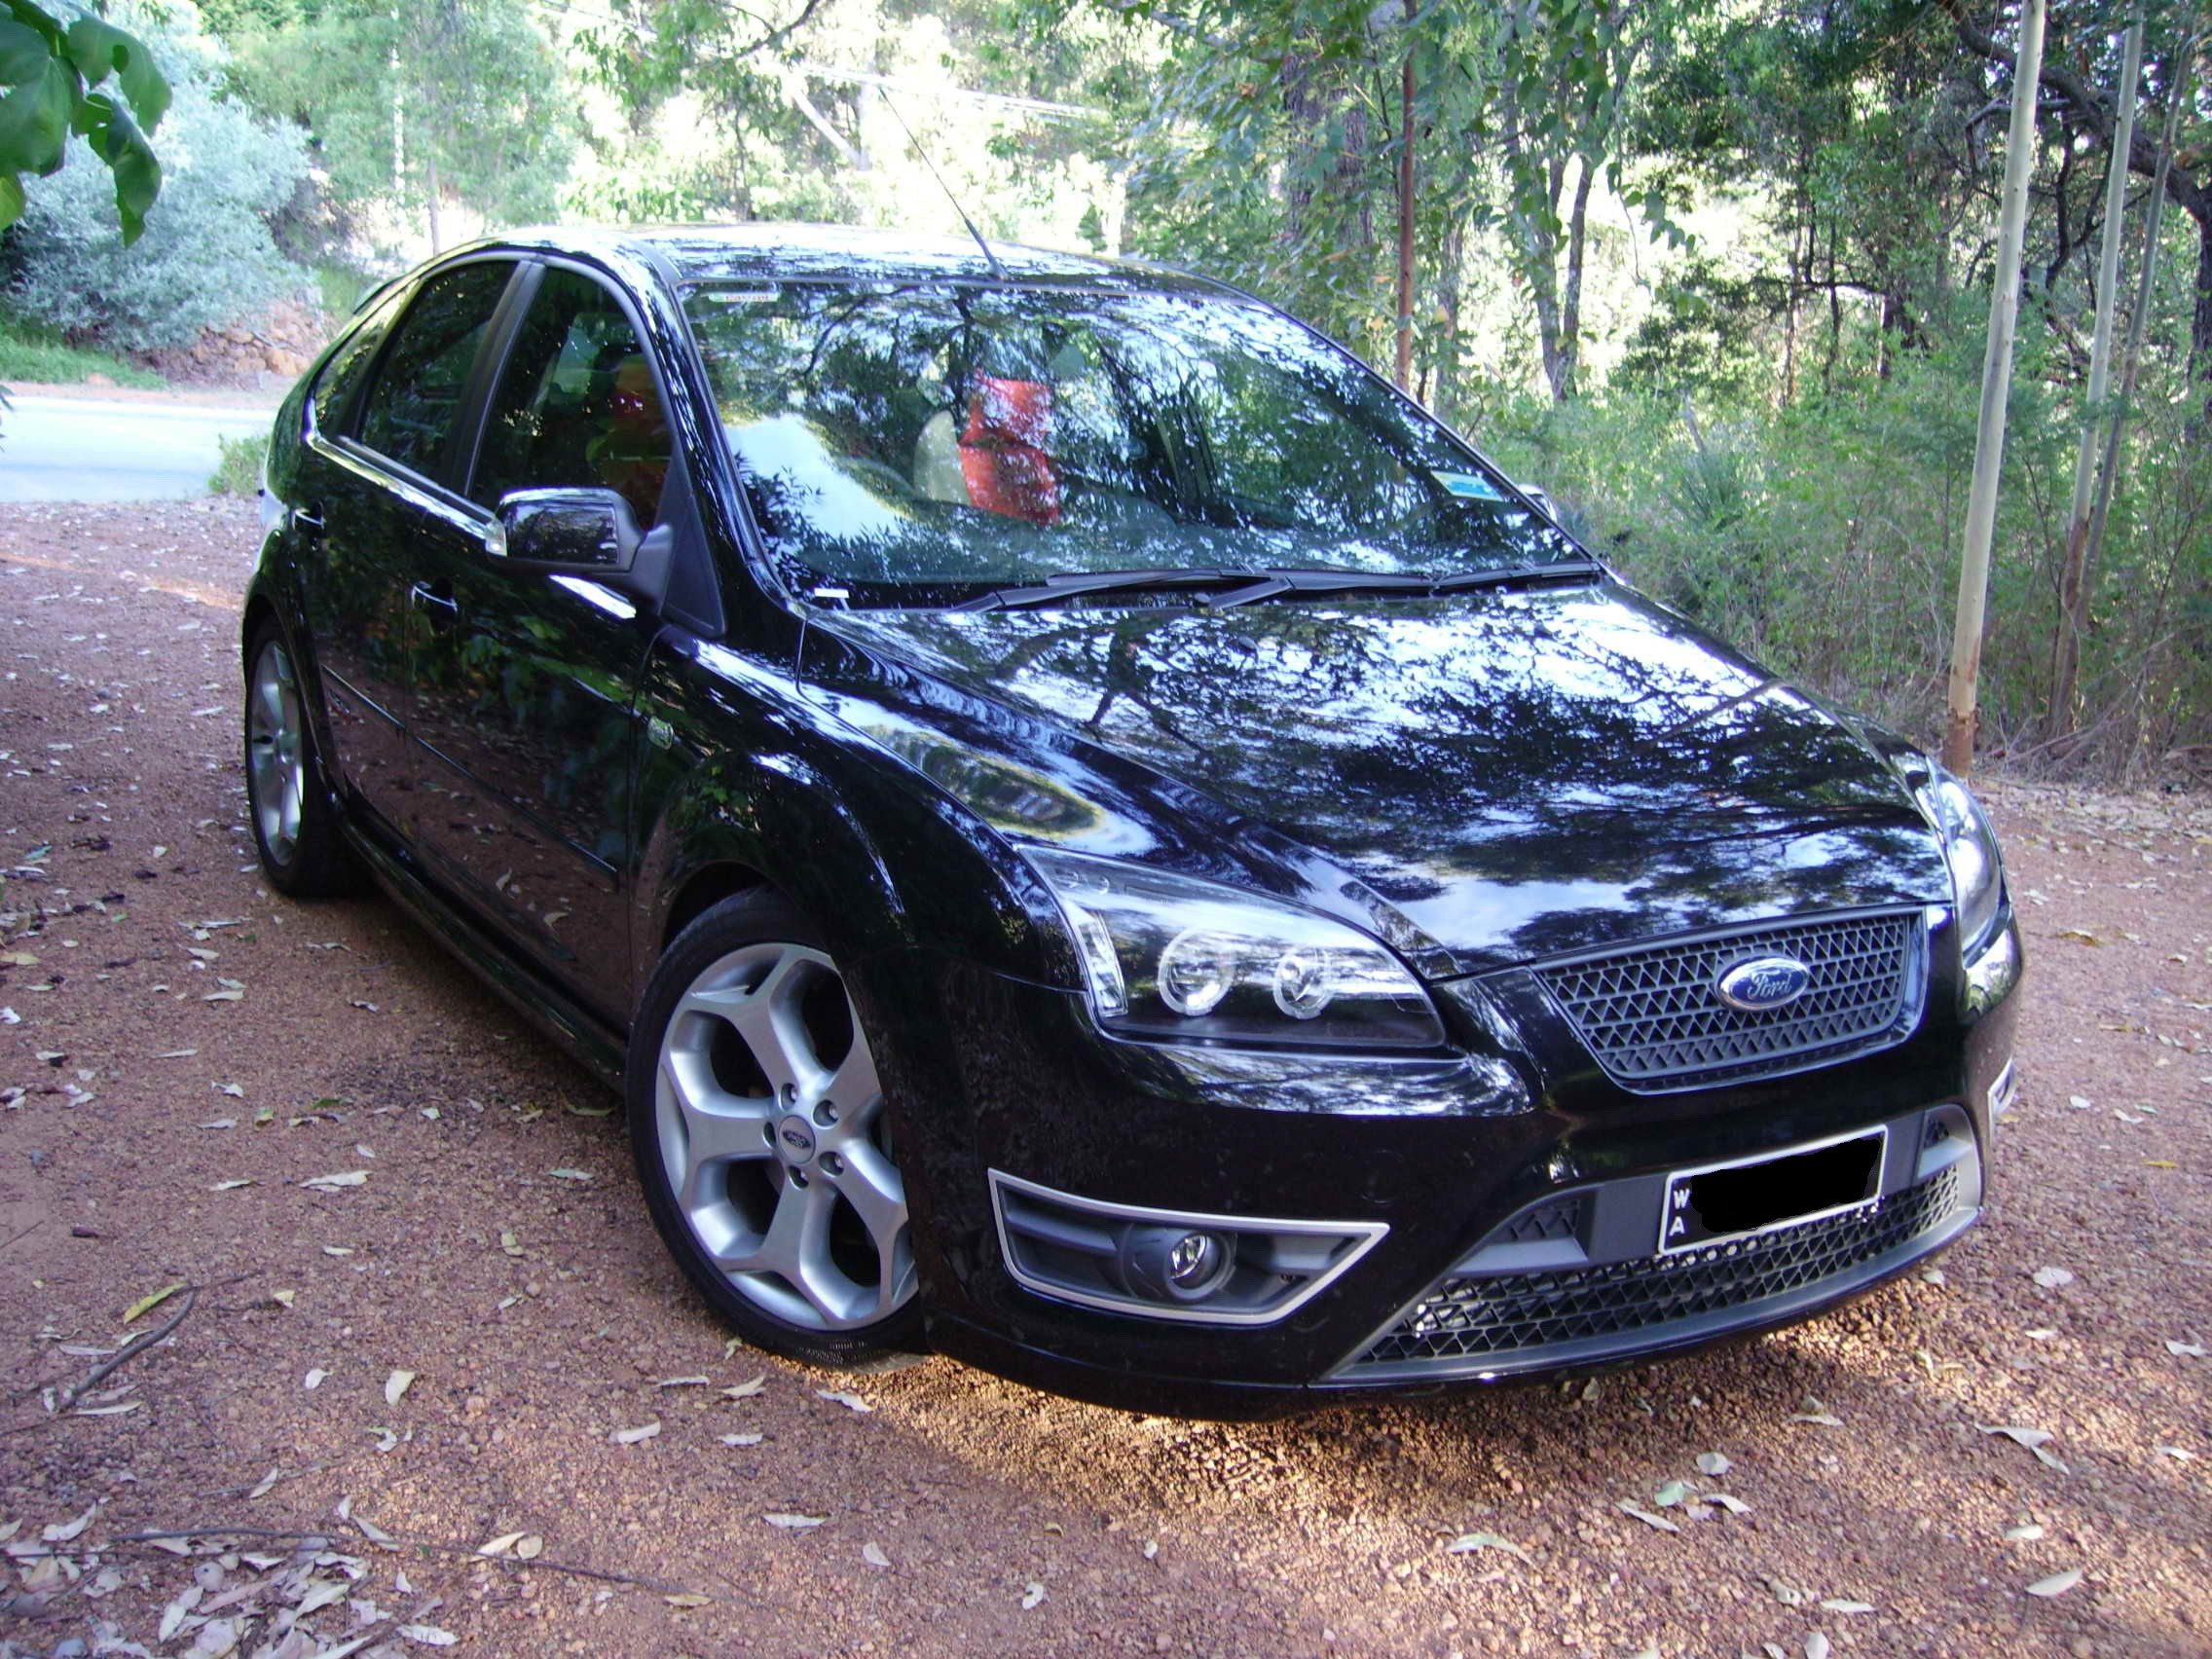 Ford focus xr5 modifications